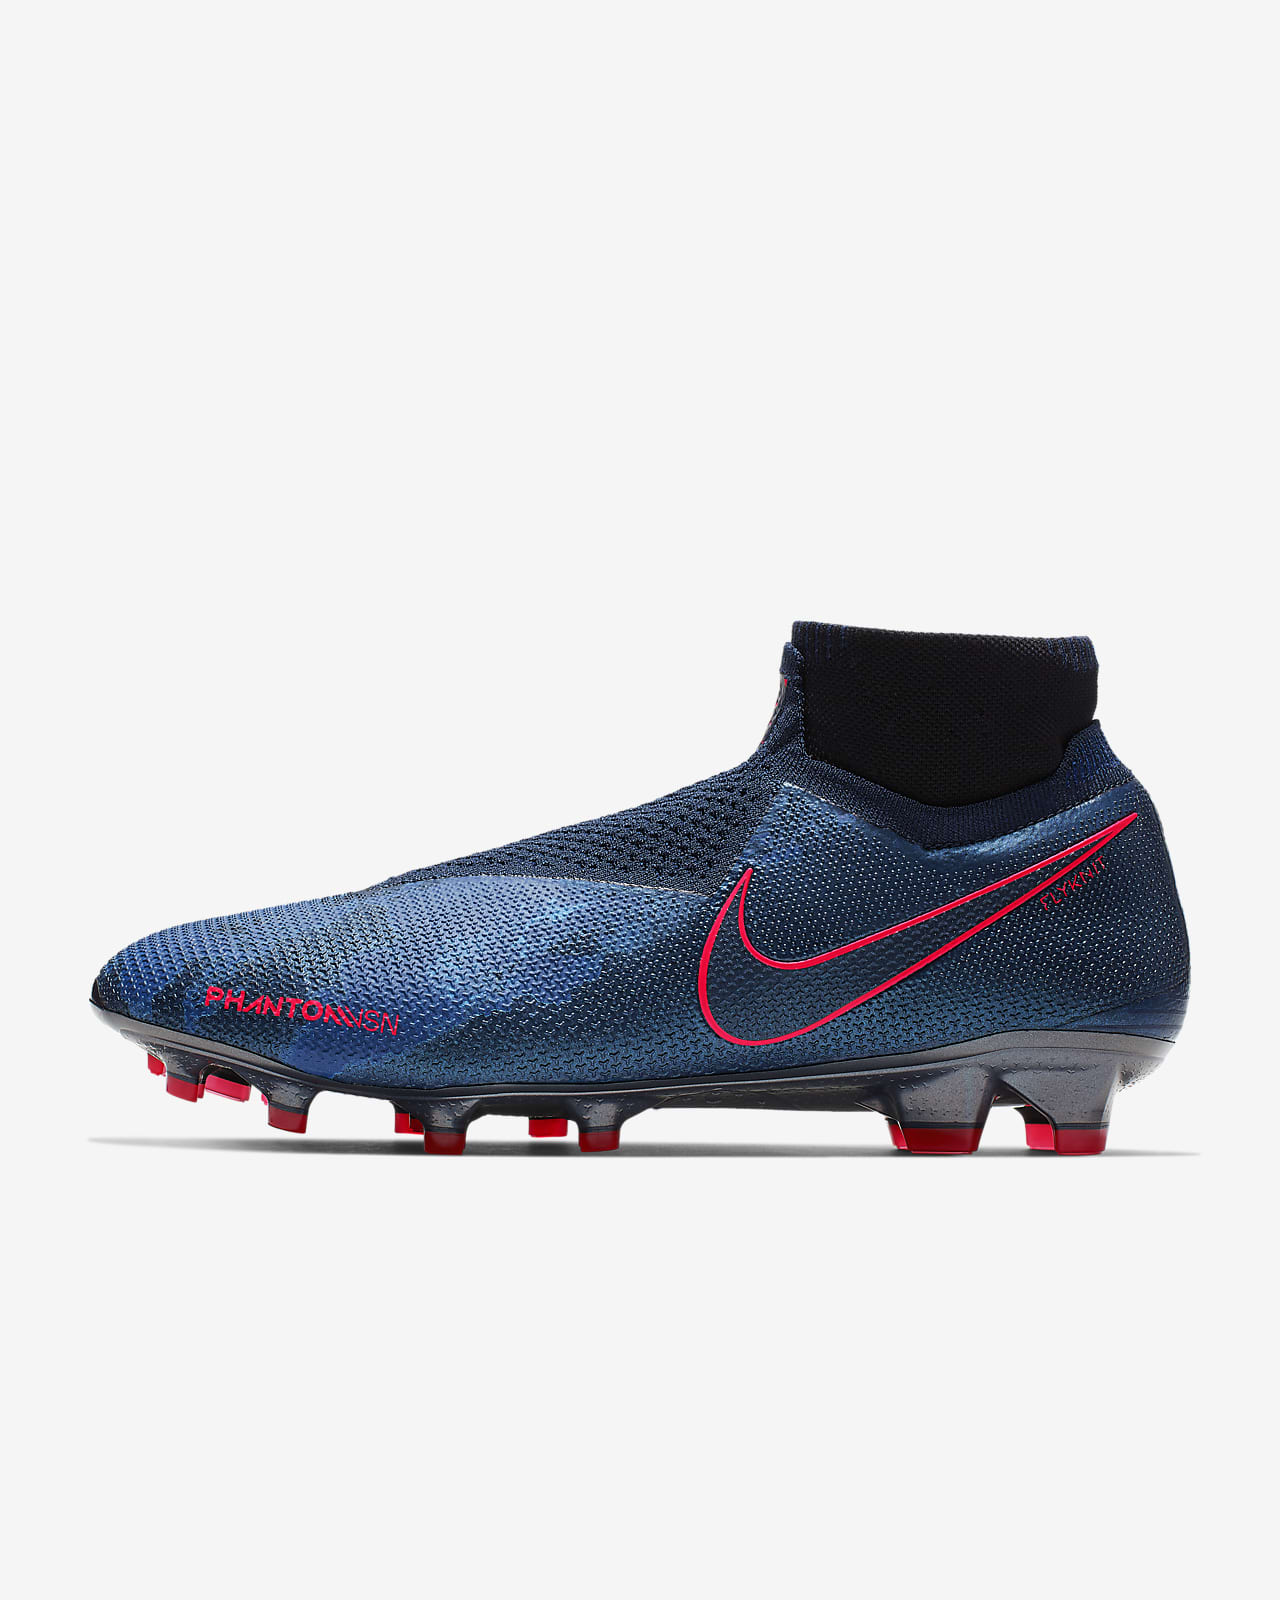 ghost soccer boots